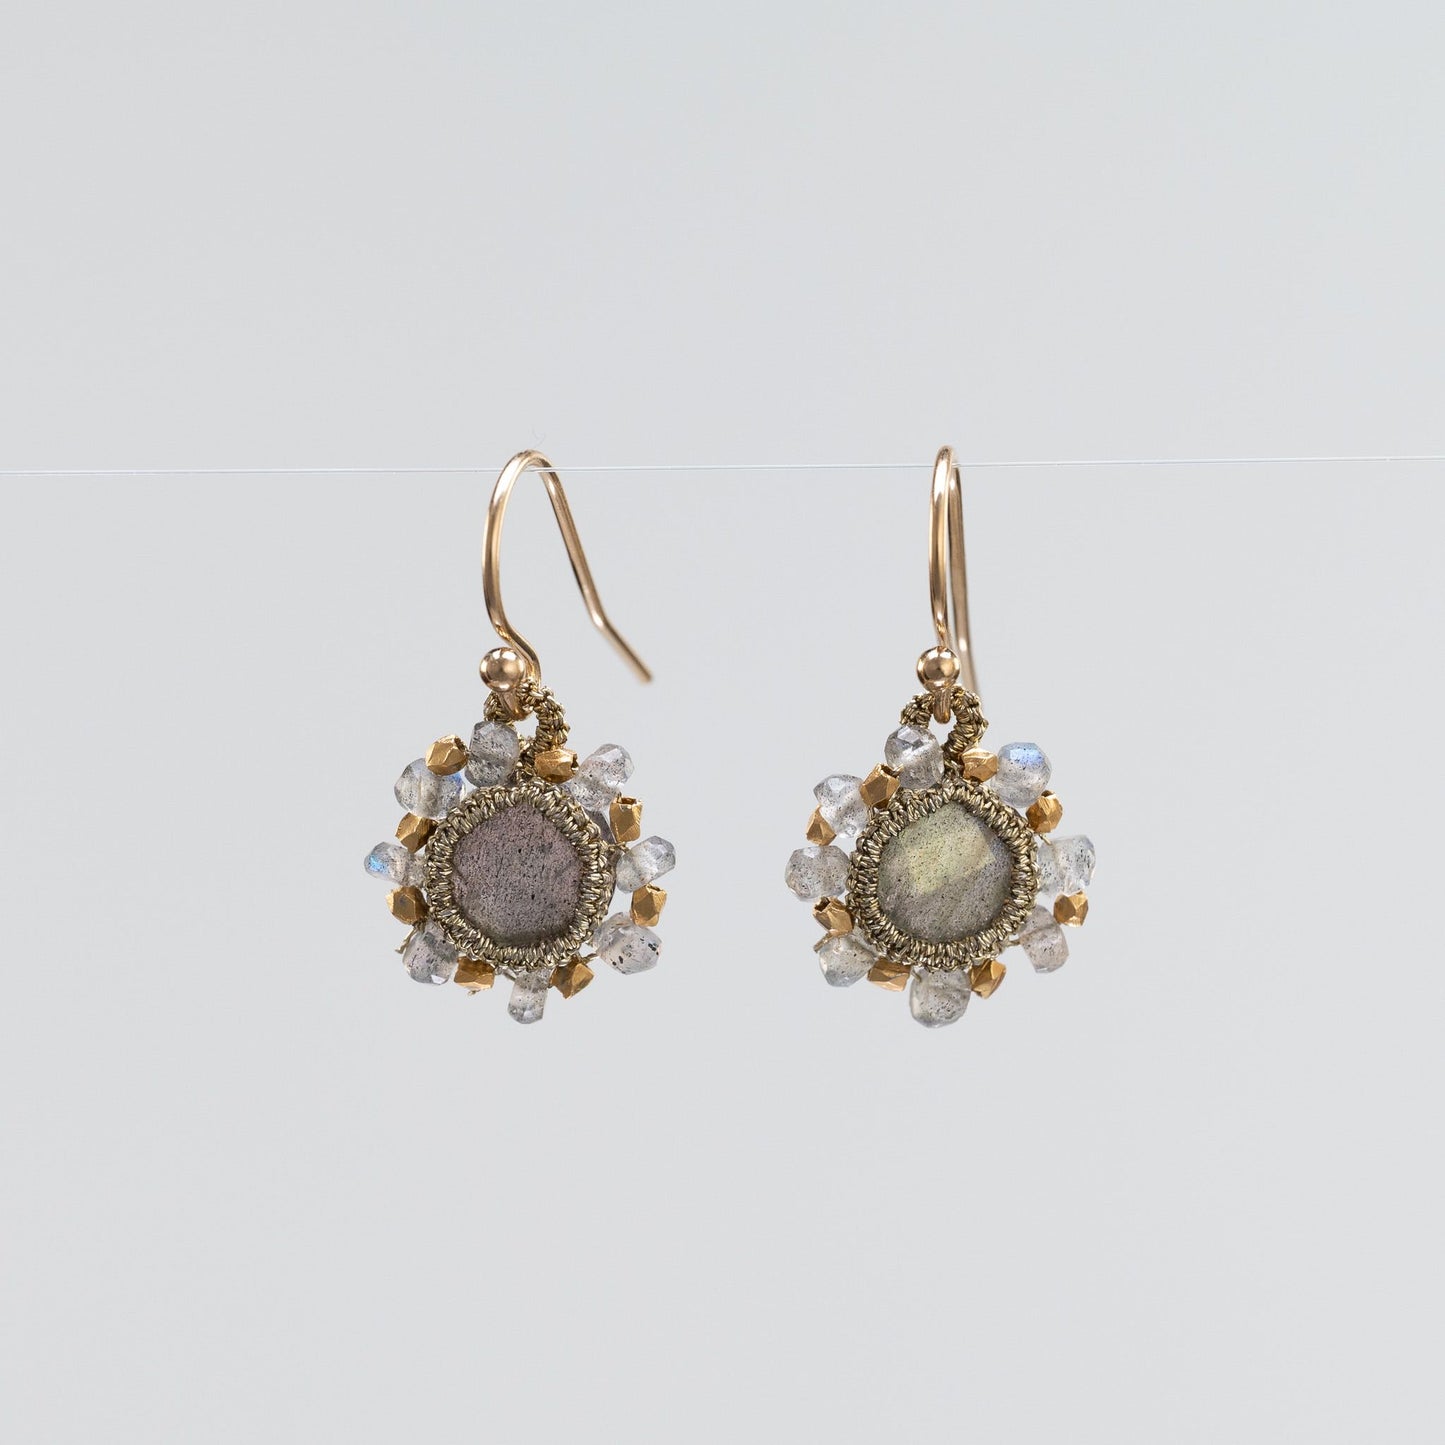 Danielle Welmond Caged Labradorite Earrings with Labradorite and Nugget Orbit